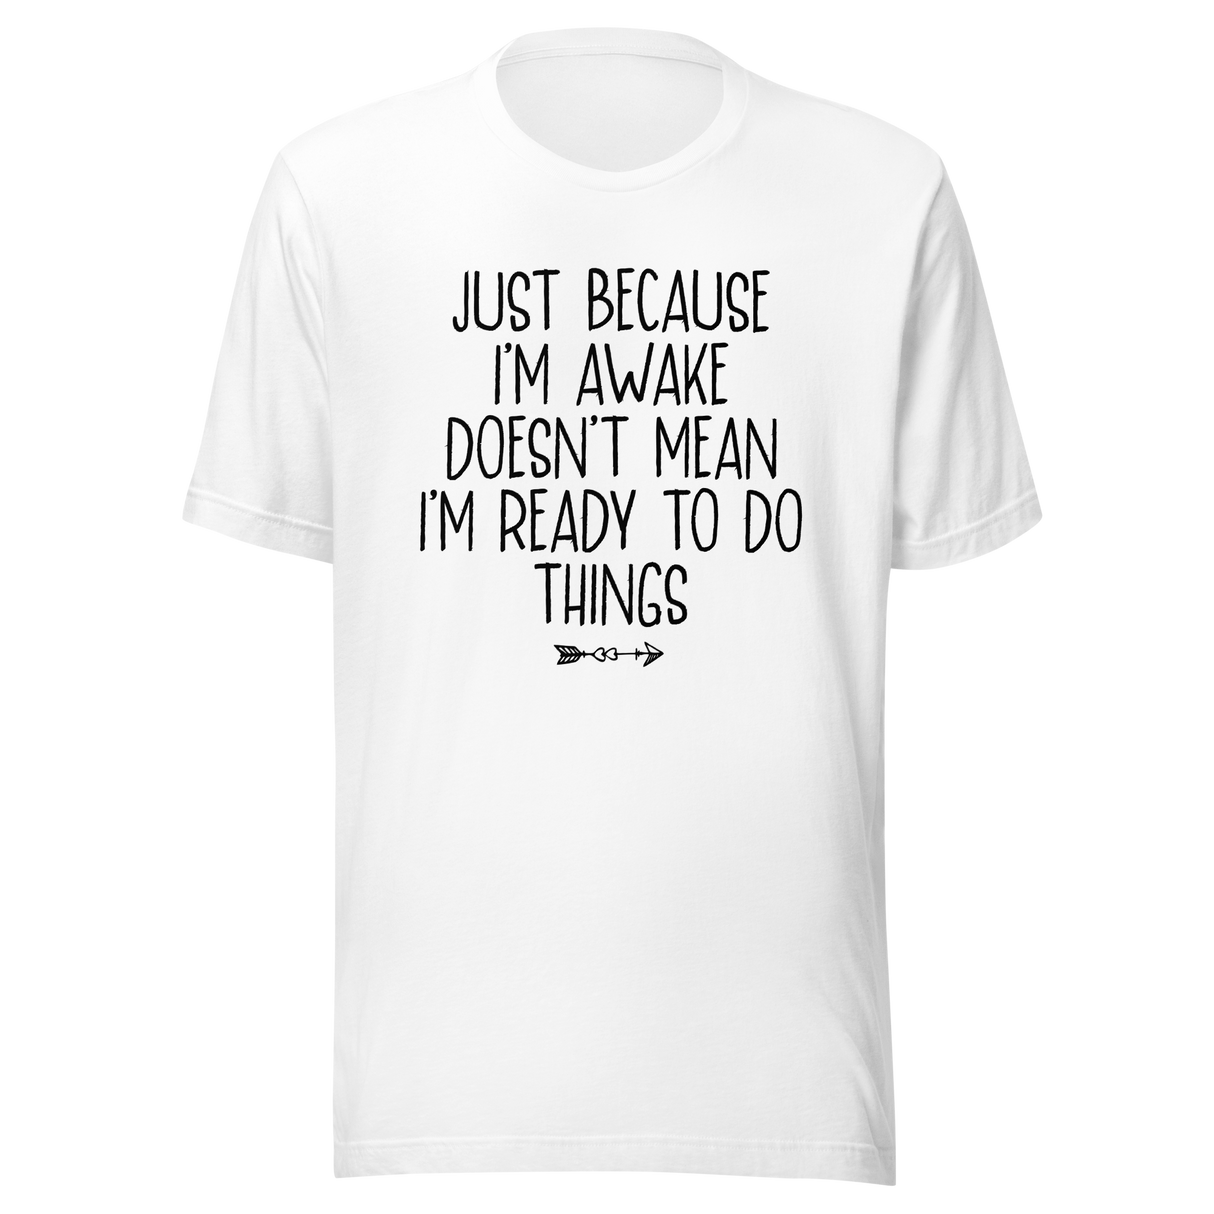 just-because-im-awake-doesnt-mean-im-ready-to-do-things-life-tee-alert-t-shirt-reluctant-tee-awake-t-shirt-unprepared-tee#color_white